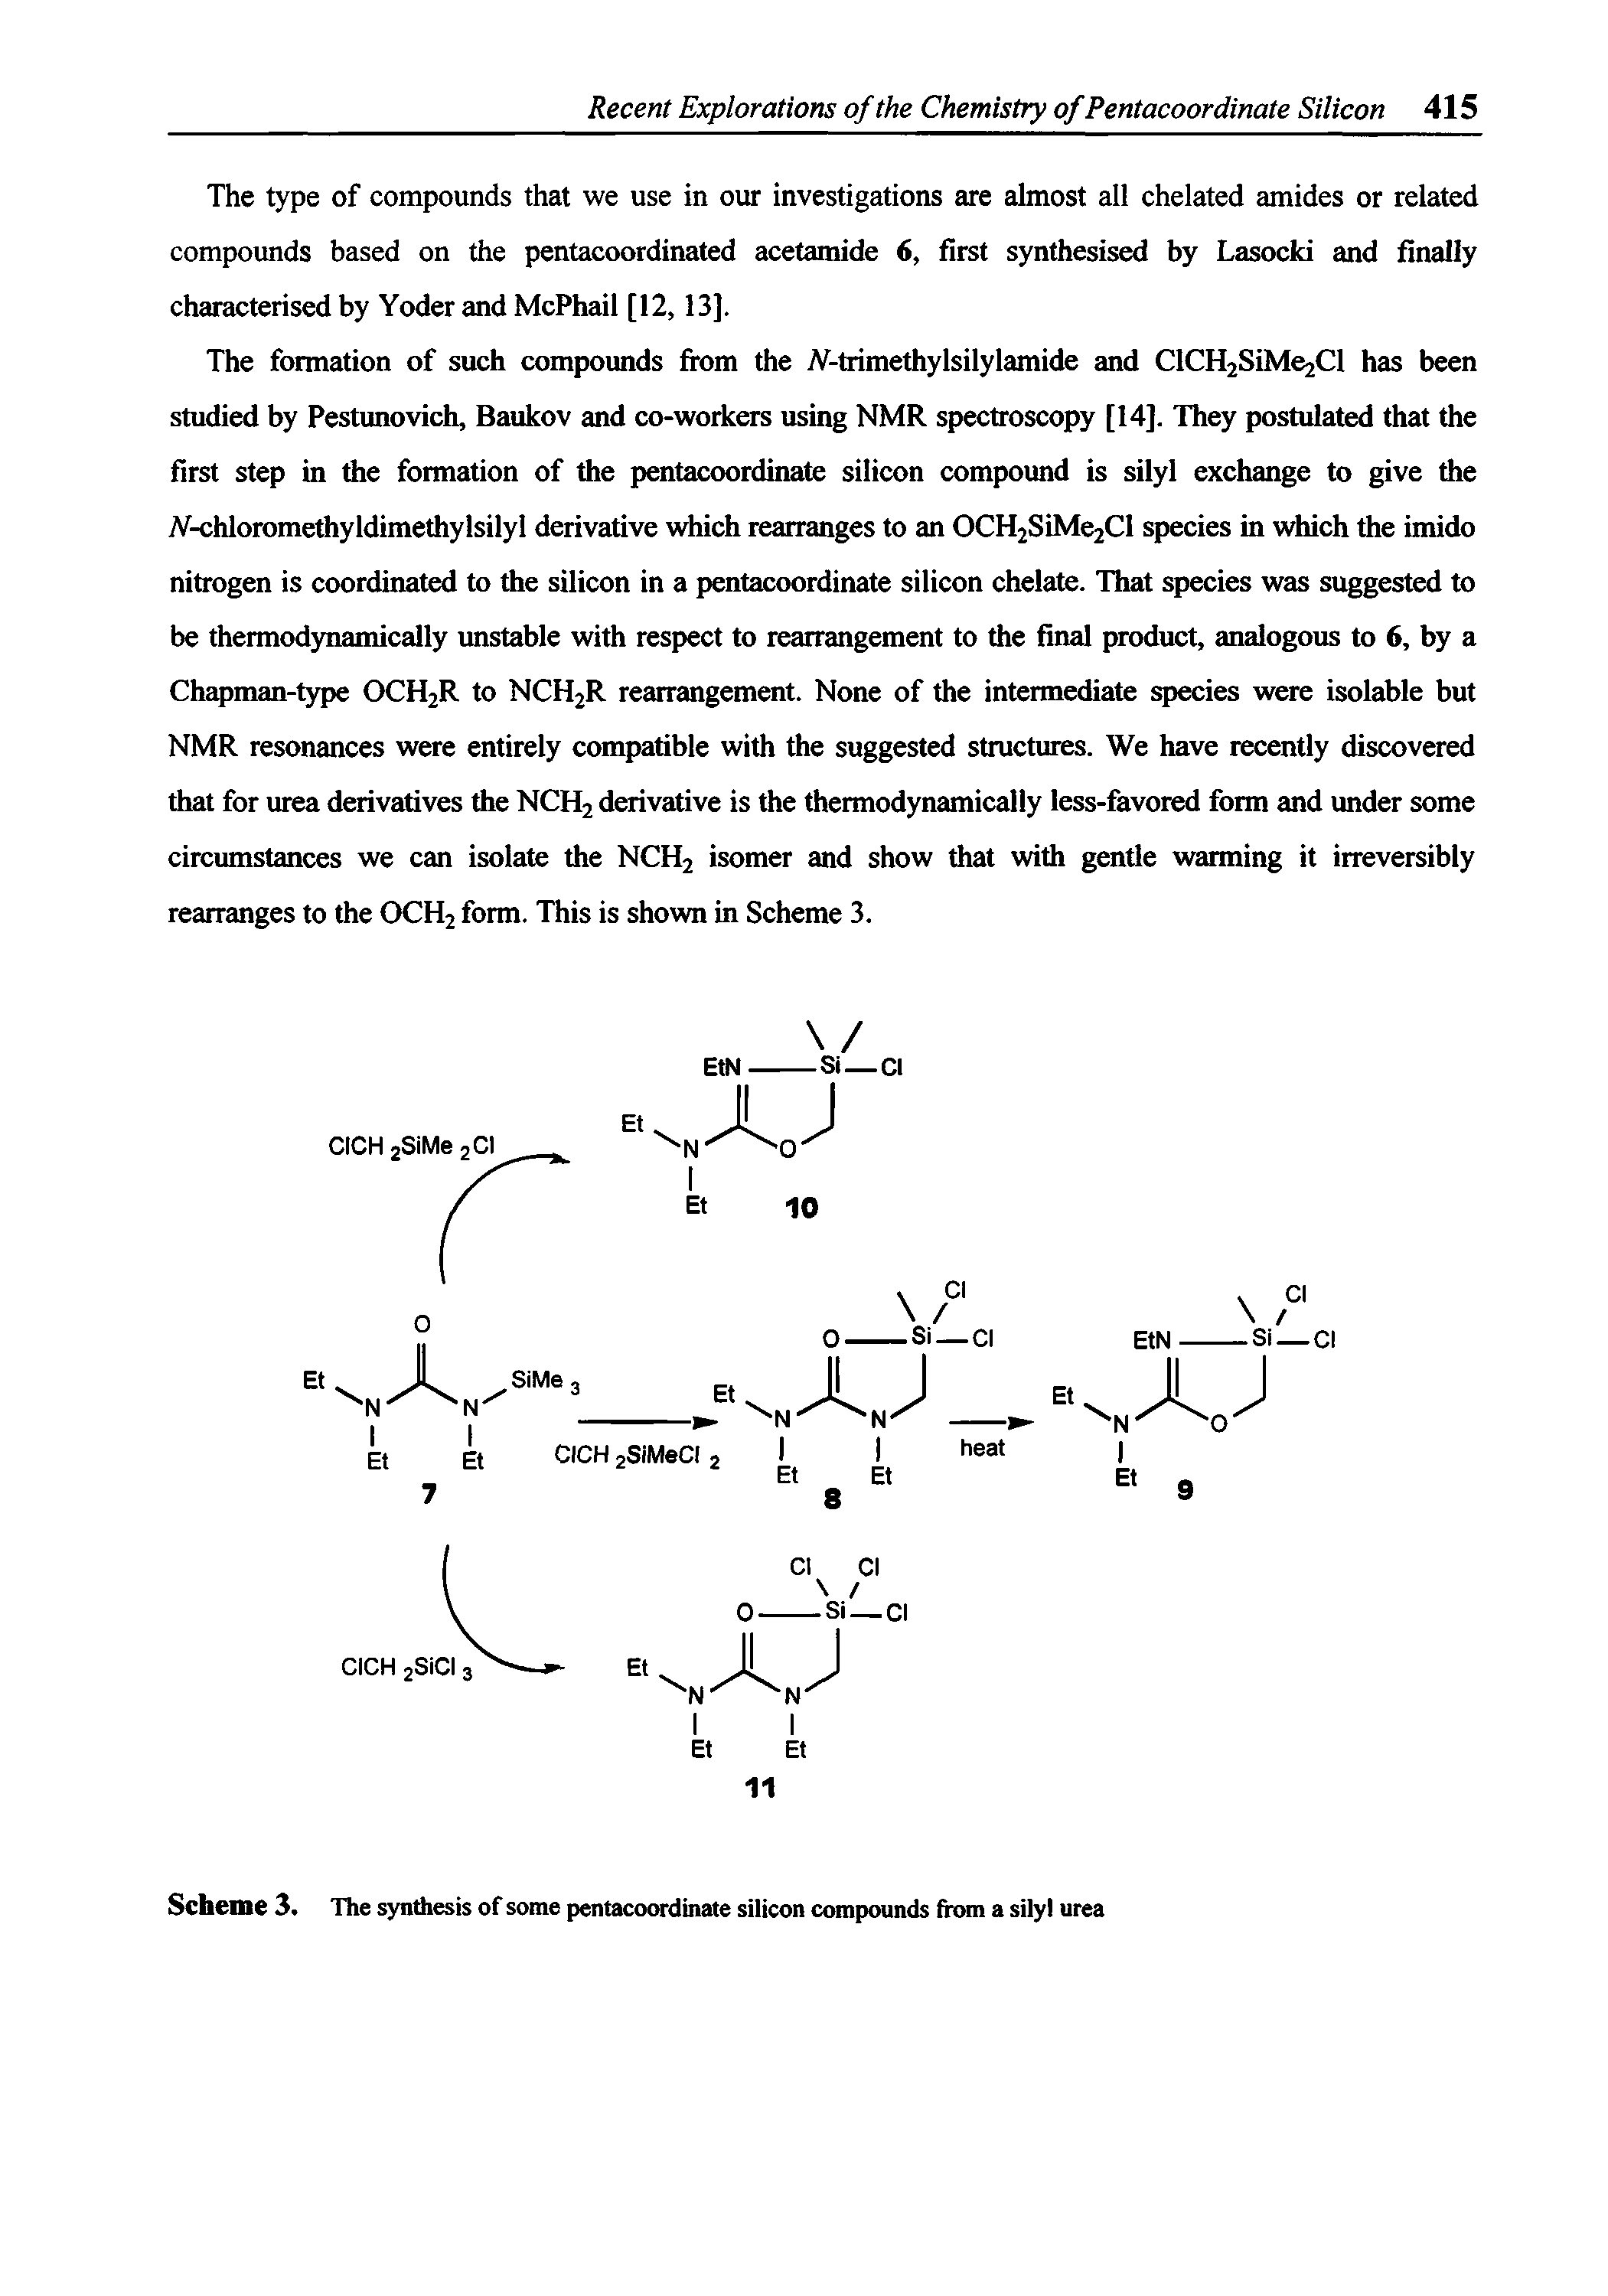 Scheme 3. The synUiesis of some pentacoordinate silicon compounds from a silyl urea...